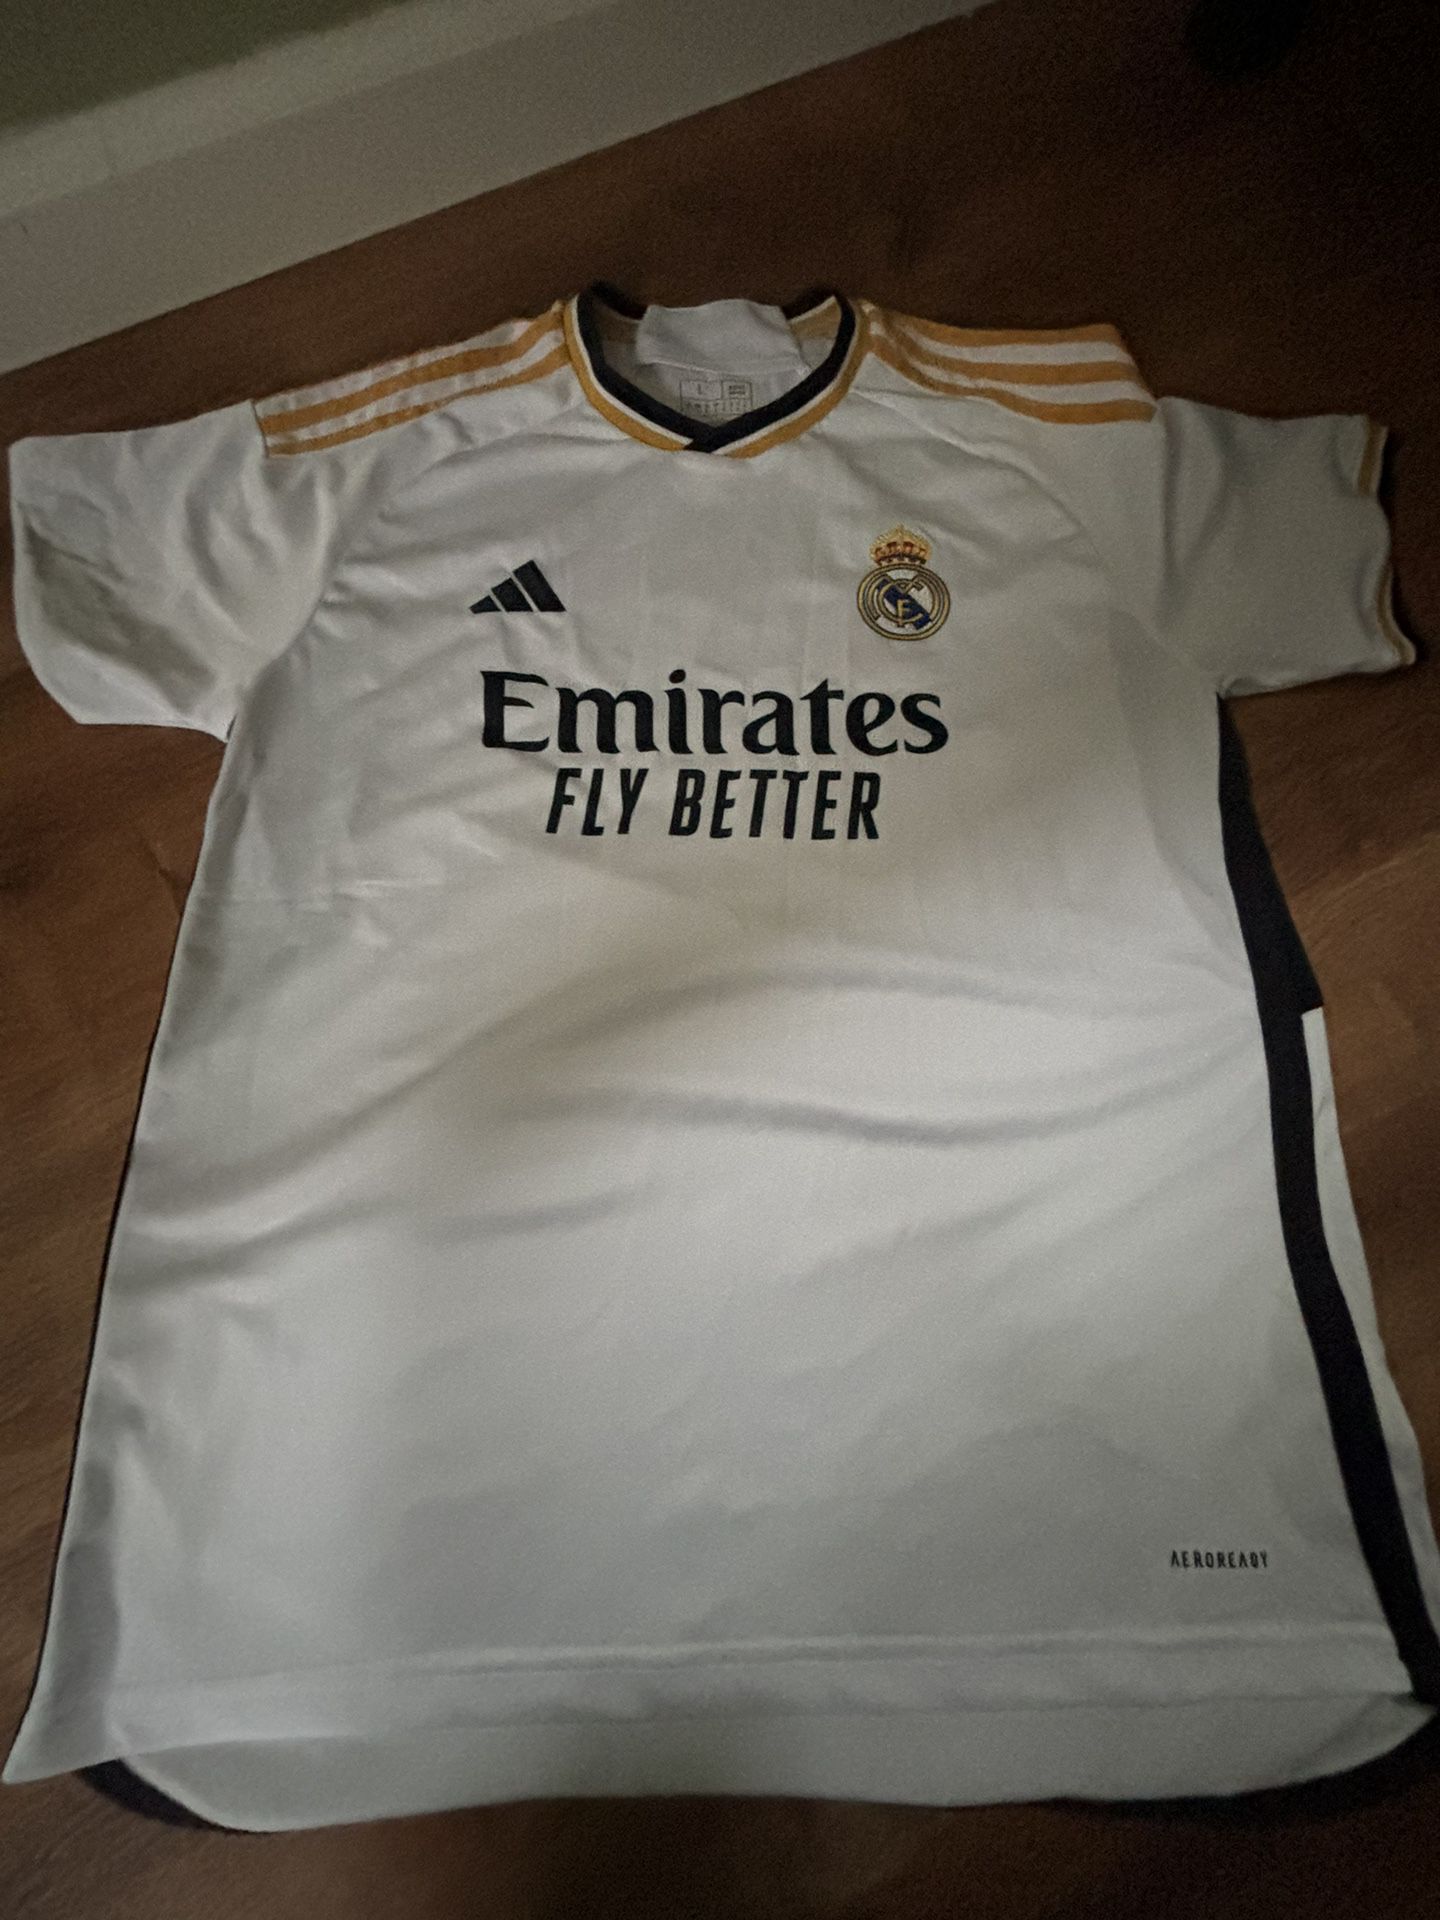 Real Madrid Jersey!